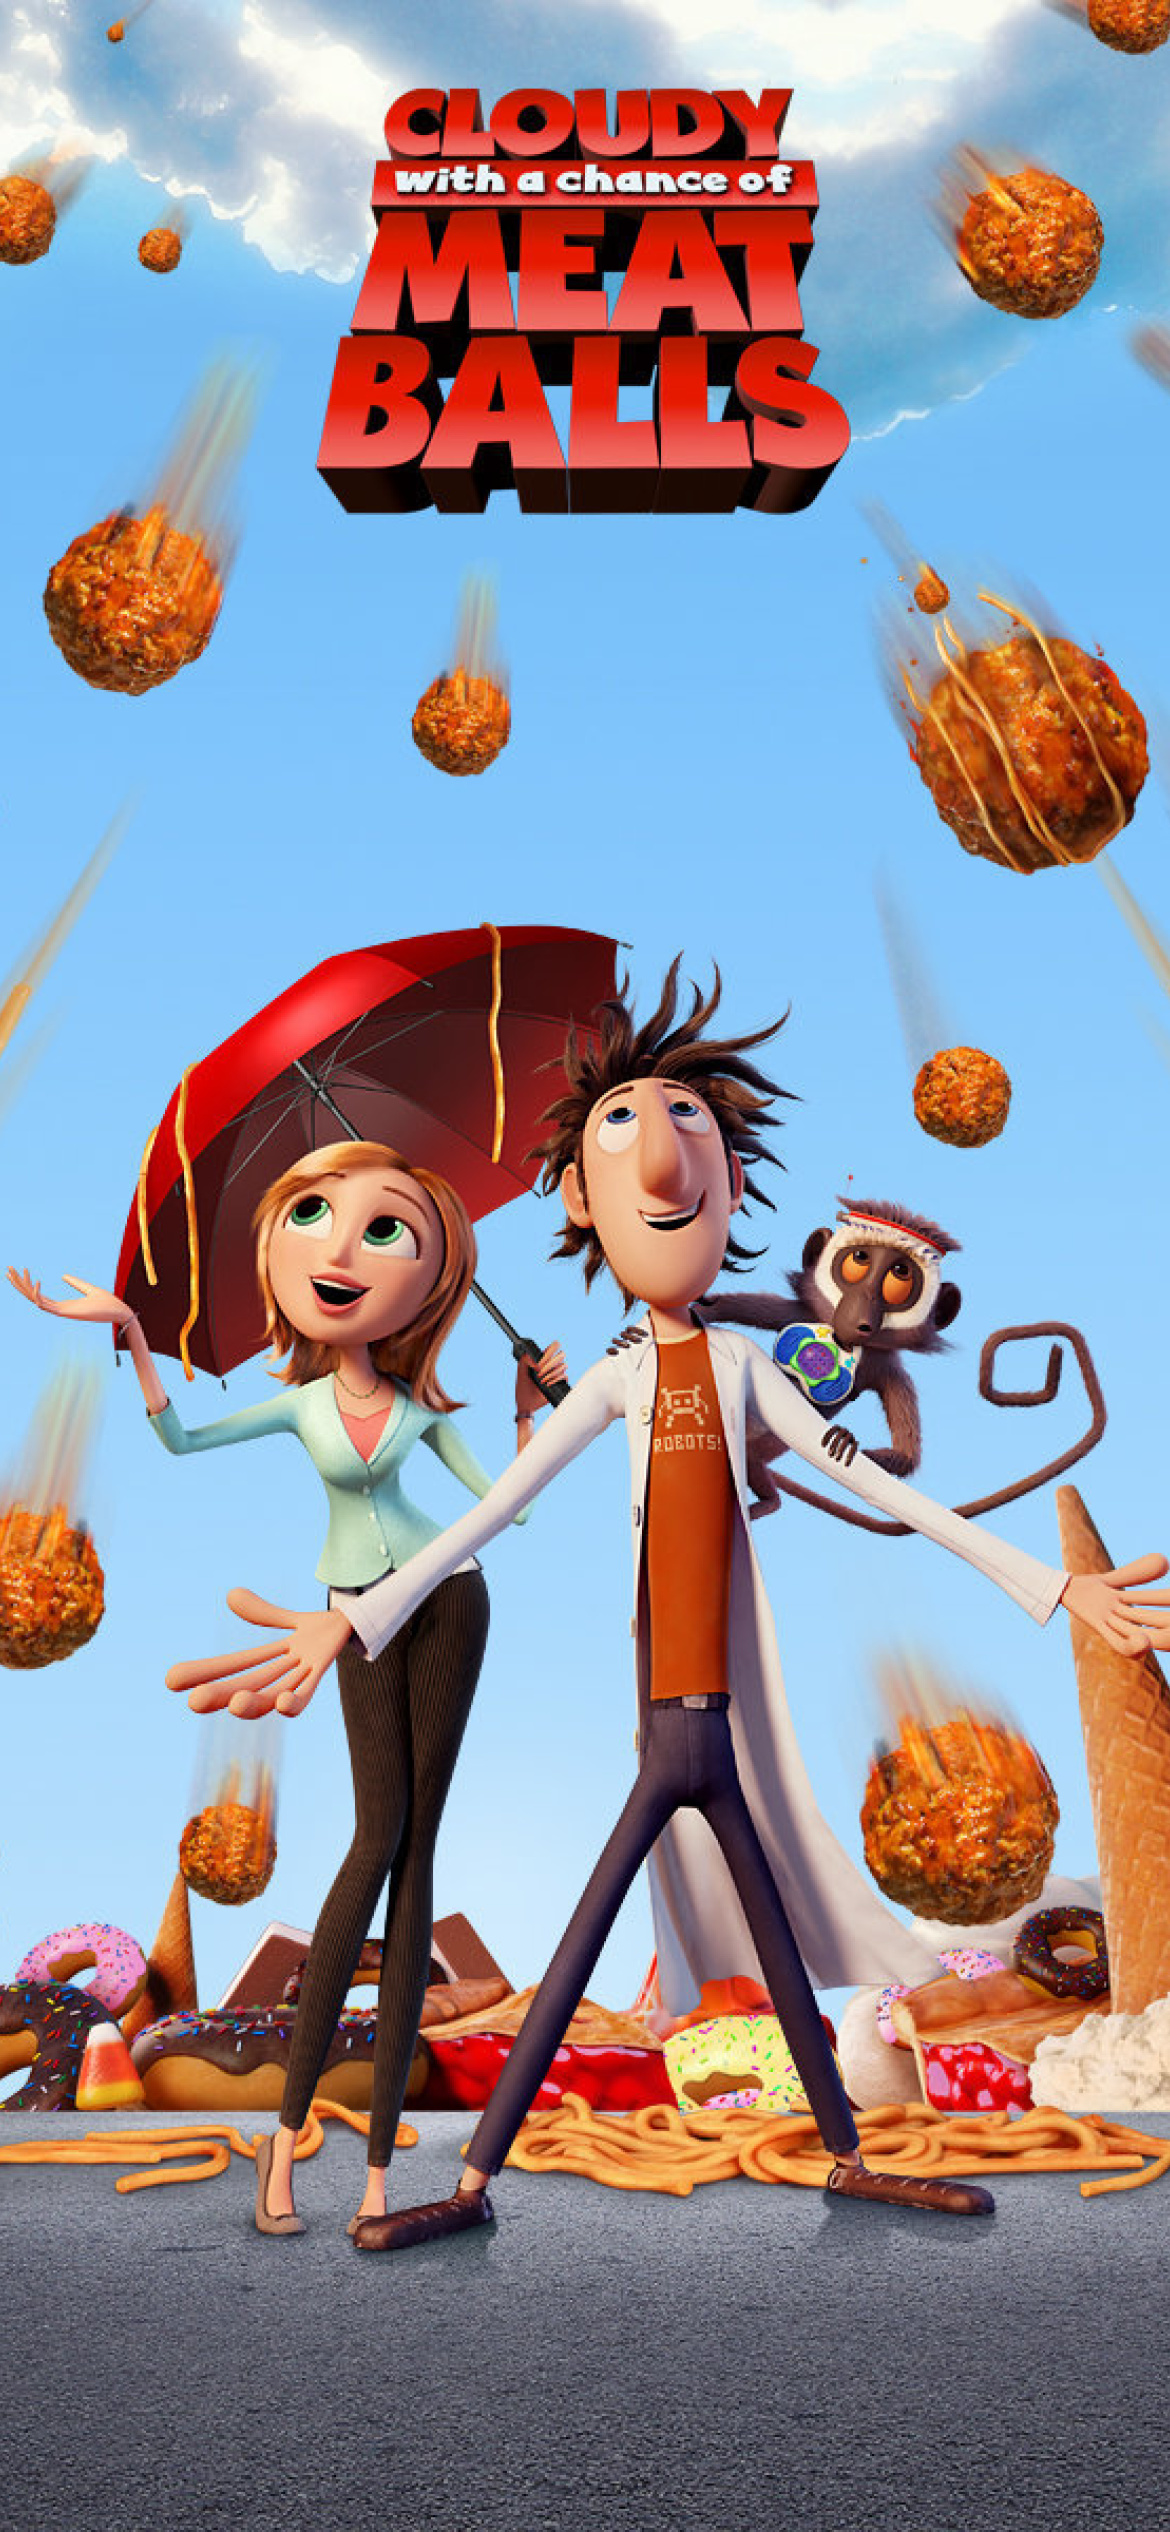 Cloudy with a Chance of Meatballs wallpaper 1170x2532